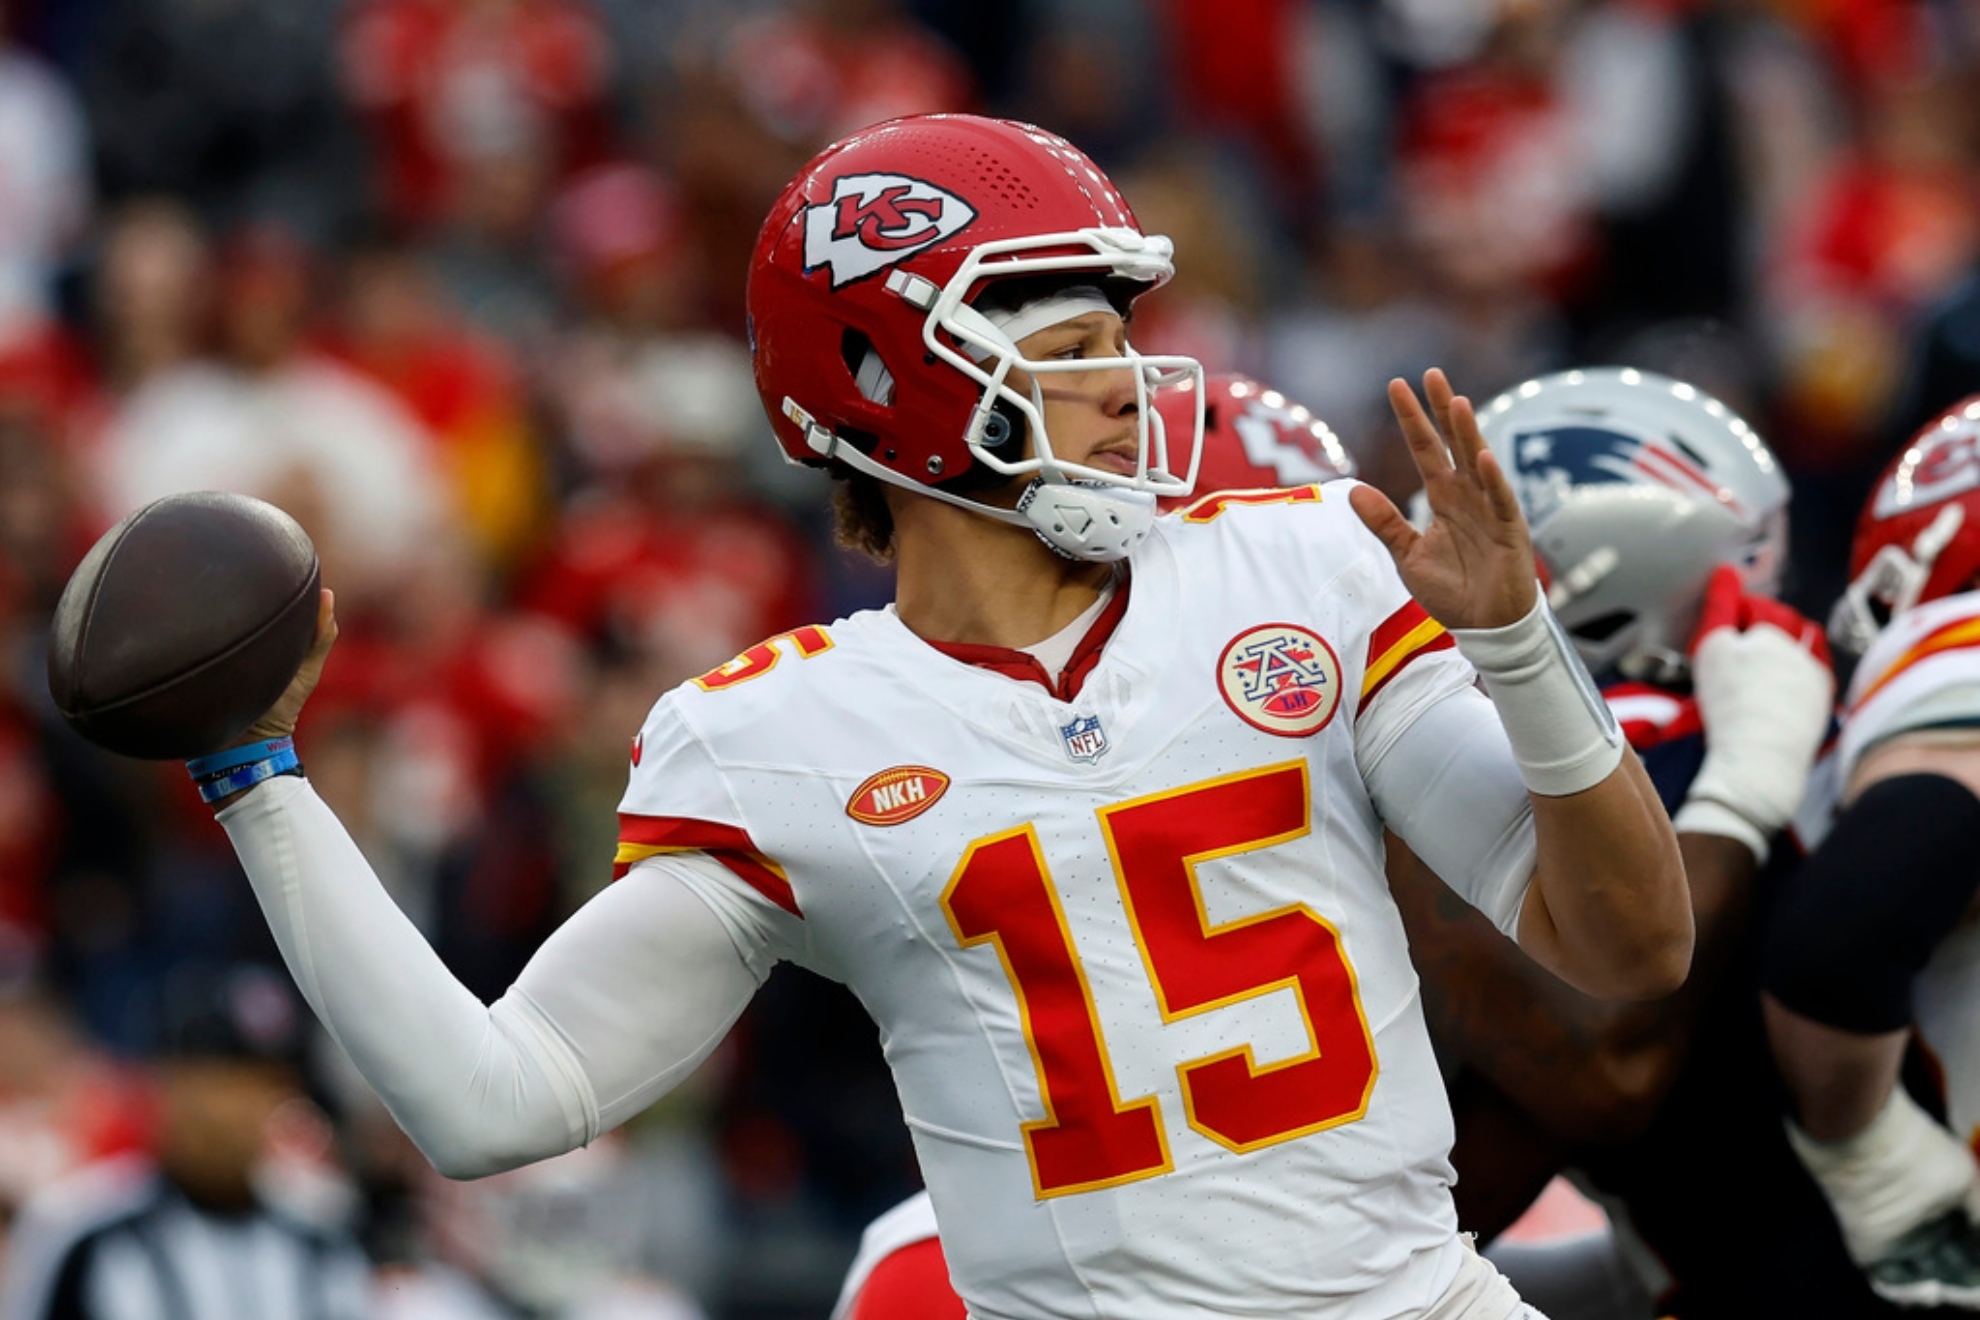 Mahomes has become the center of a lighthearted debate